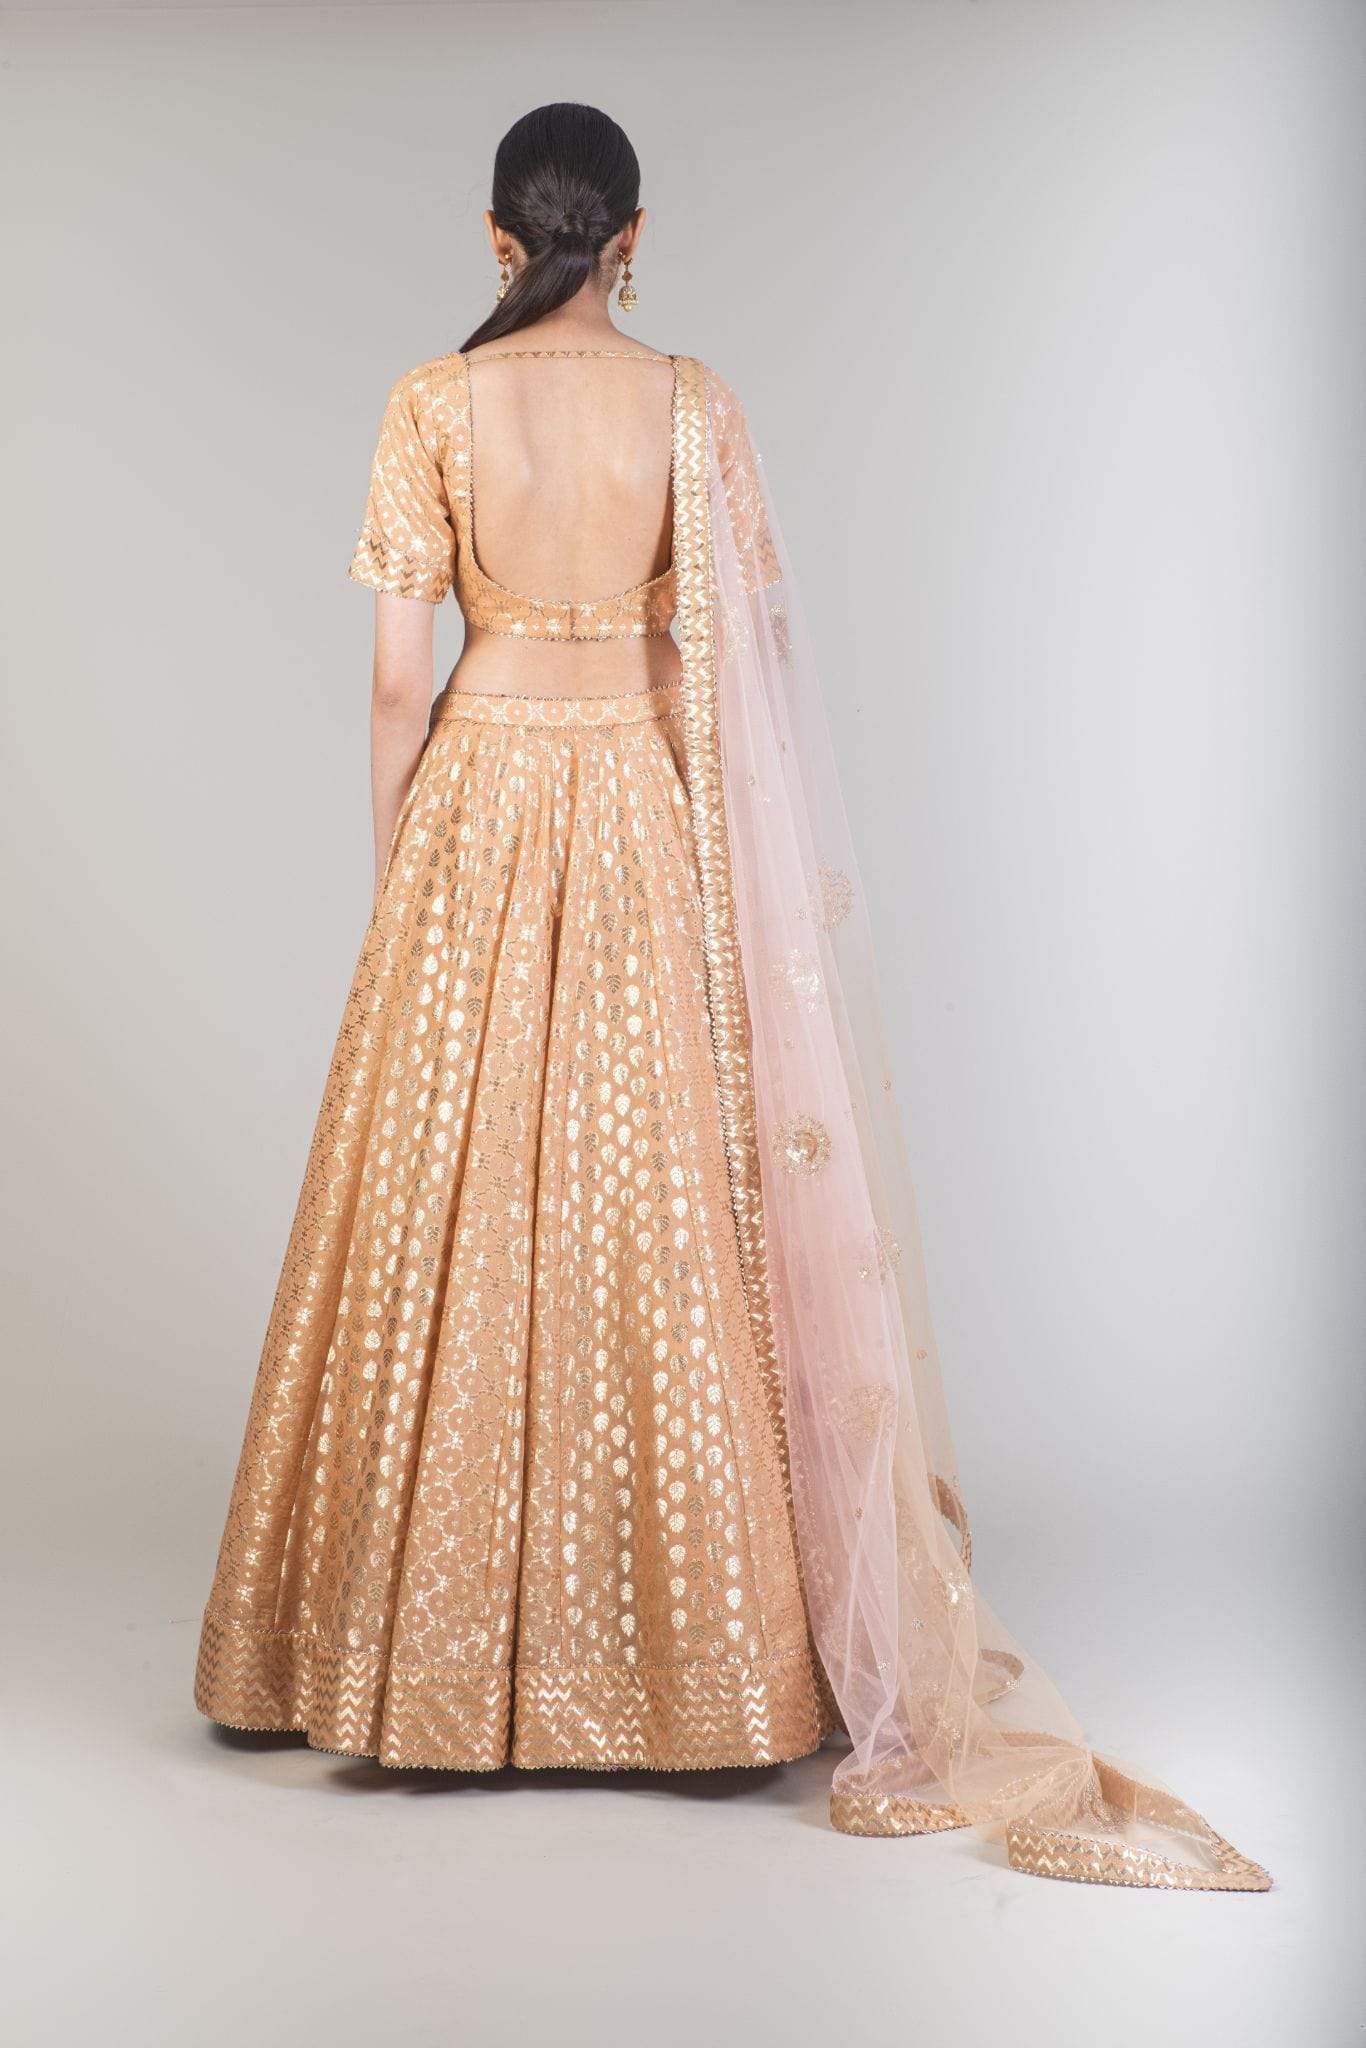 Gold Banarasi Lehenga Indian Clothing in Denver, CO, Aurora, CO, Boulder, CO, Fort Collins, CO, Colorado Springs, CO, Parker, CO, Highlands Ranch, CO, Cherry Creek, CO, Centennial, CO, and Longmont, CO. NATIONWIDE SHIPPING USA- India Fashion X